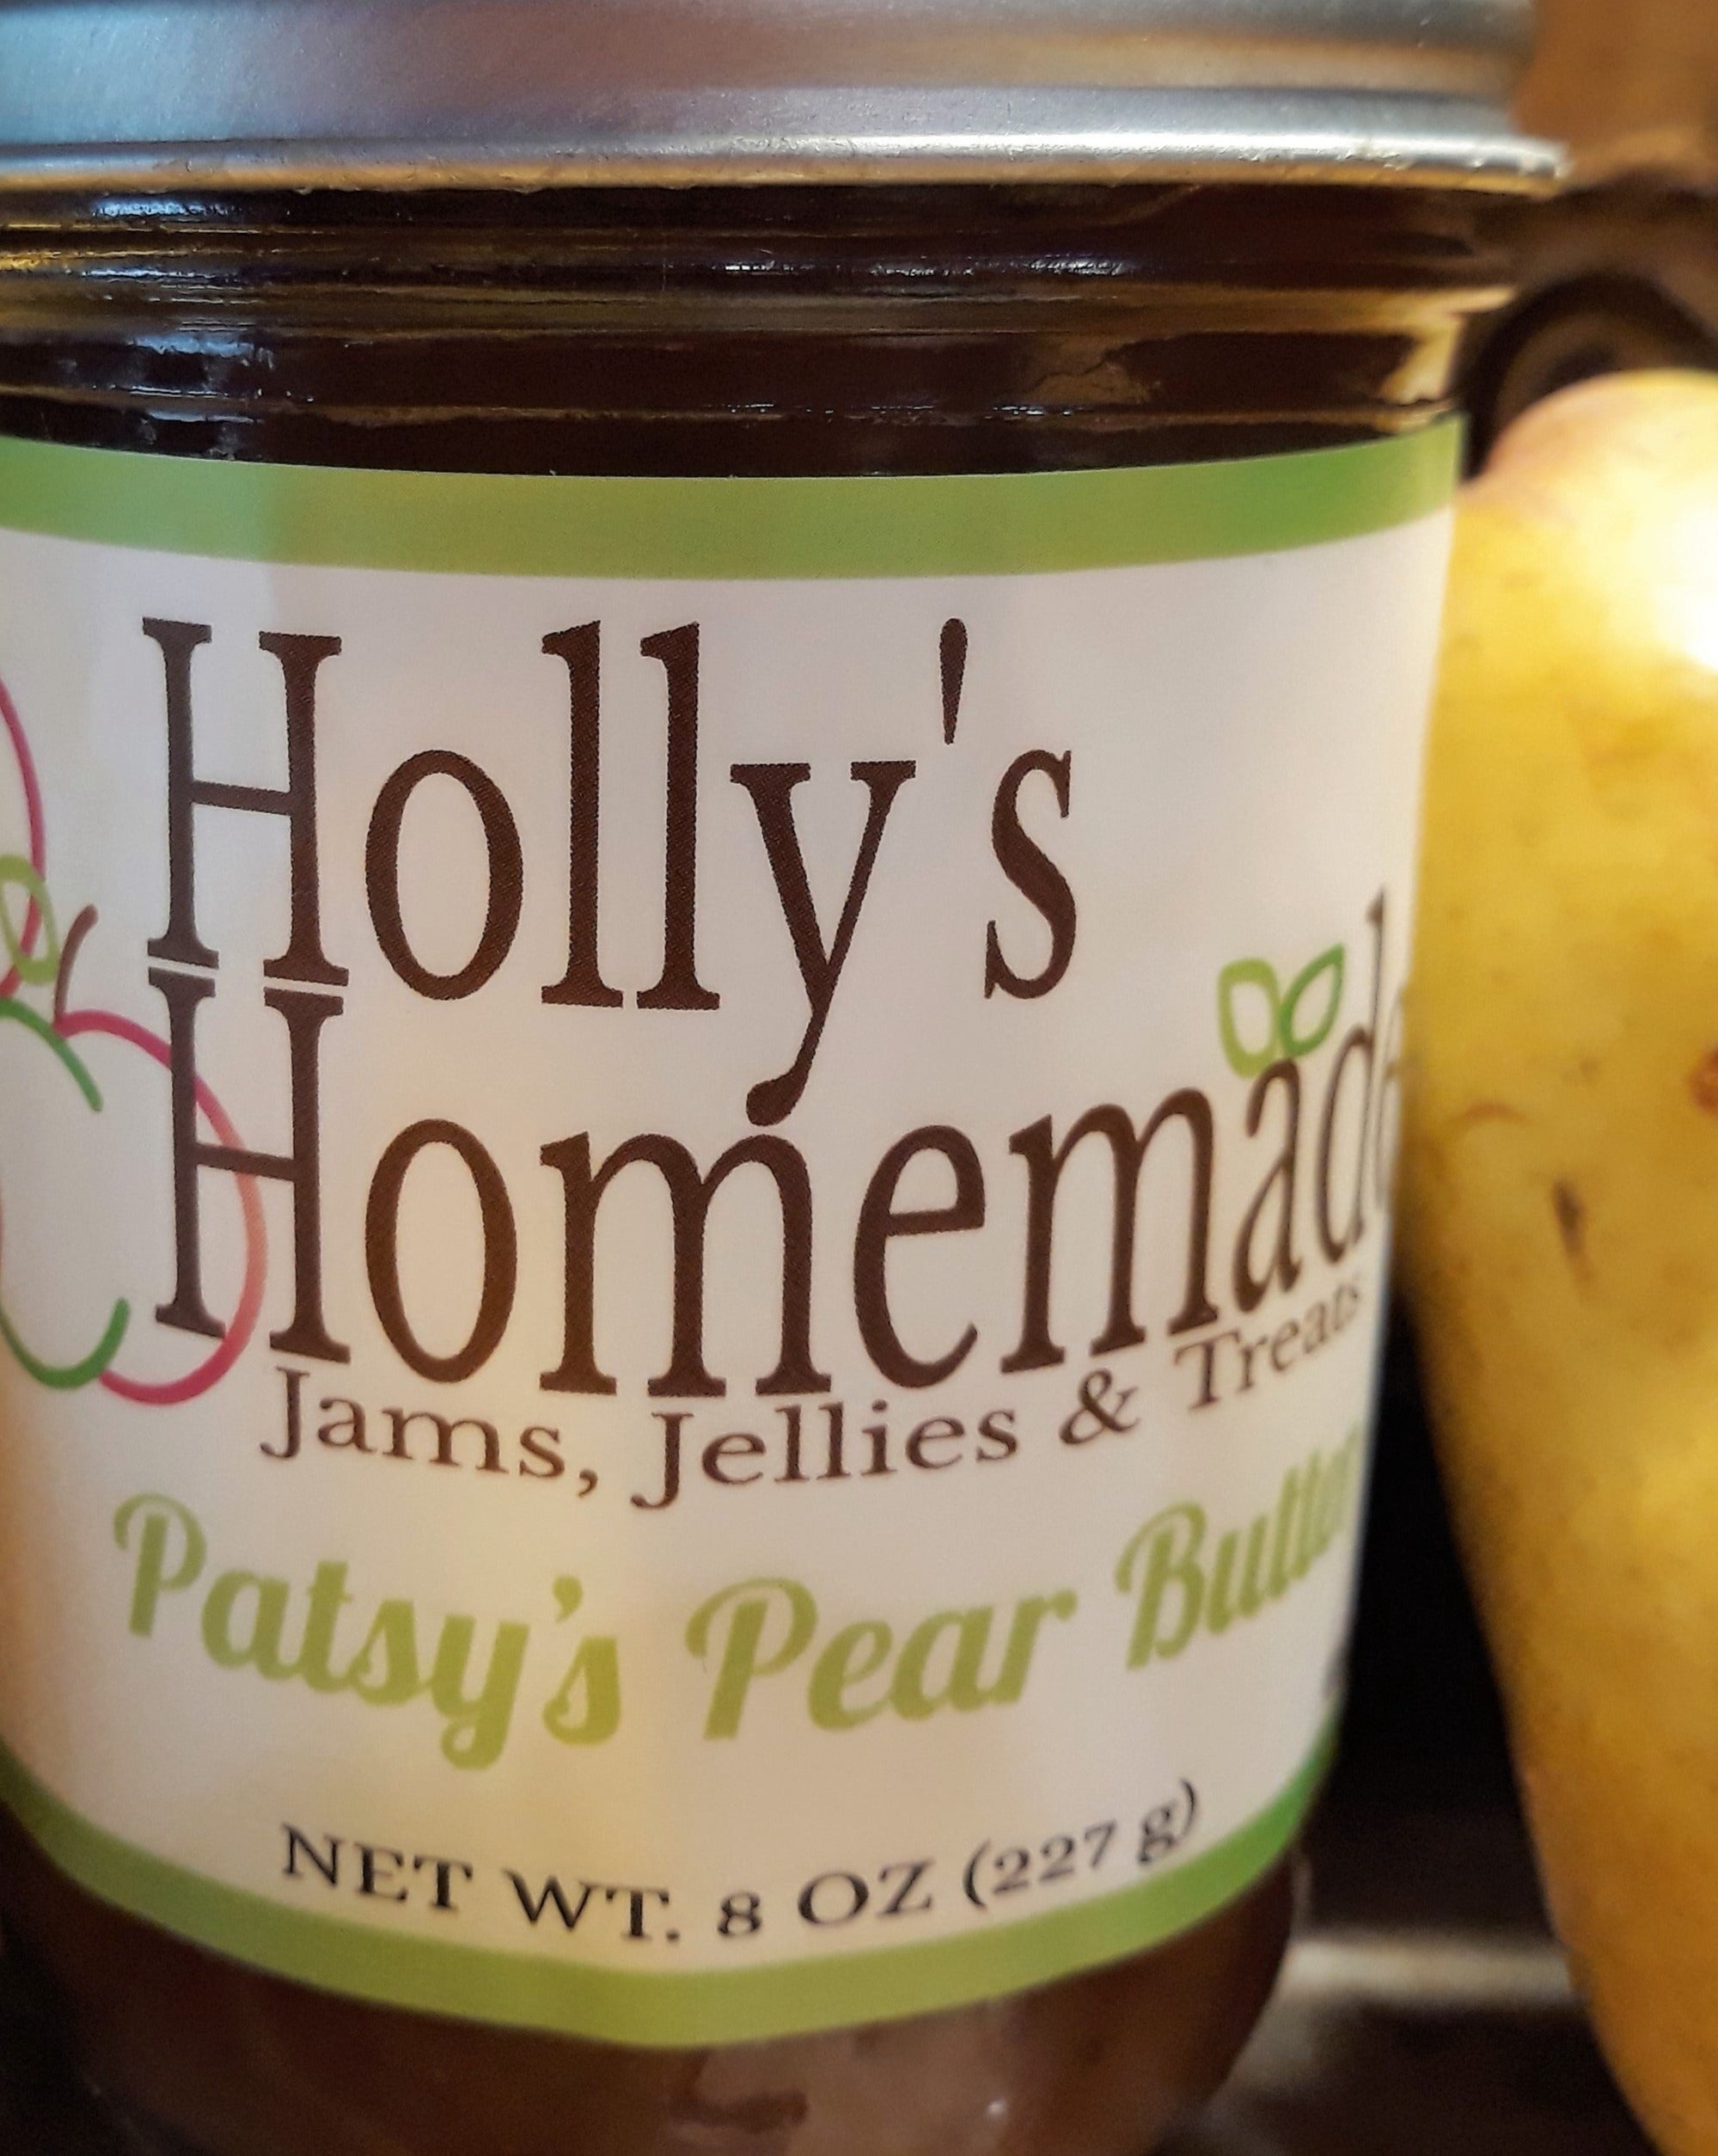 Patsy's Pear Butter